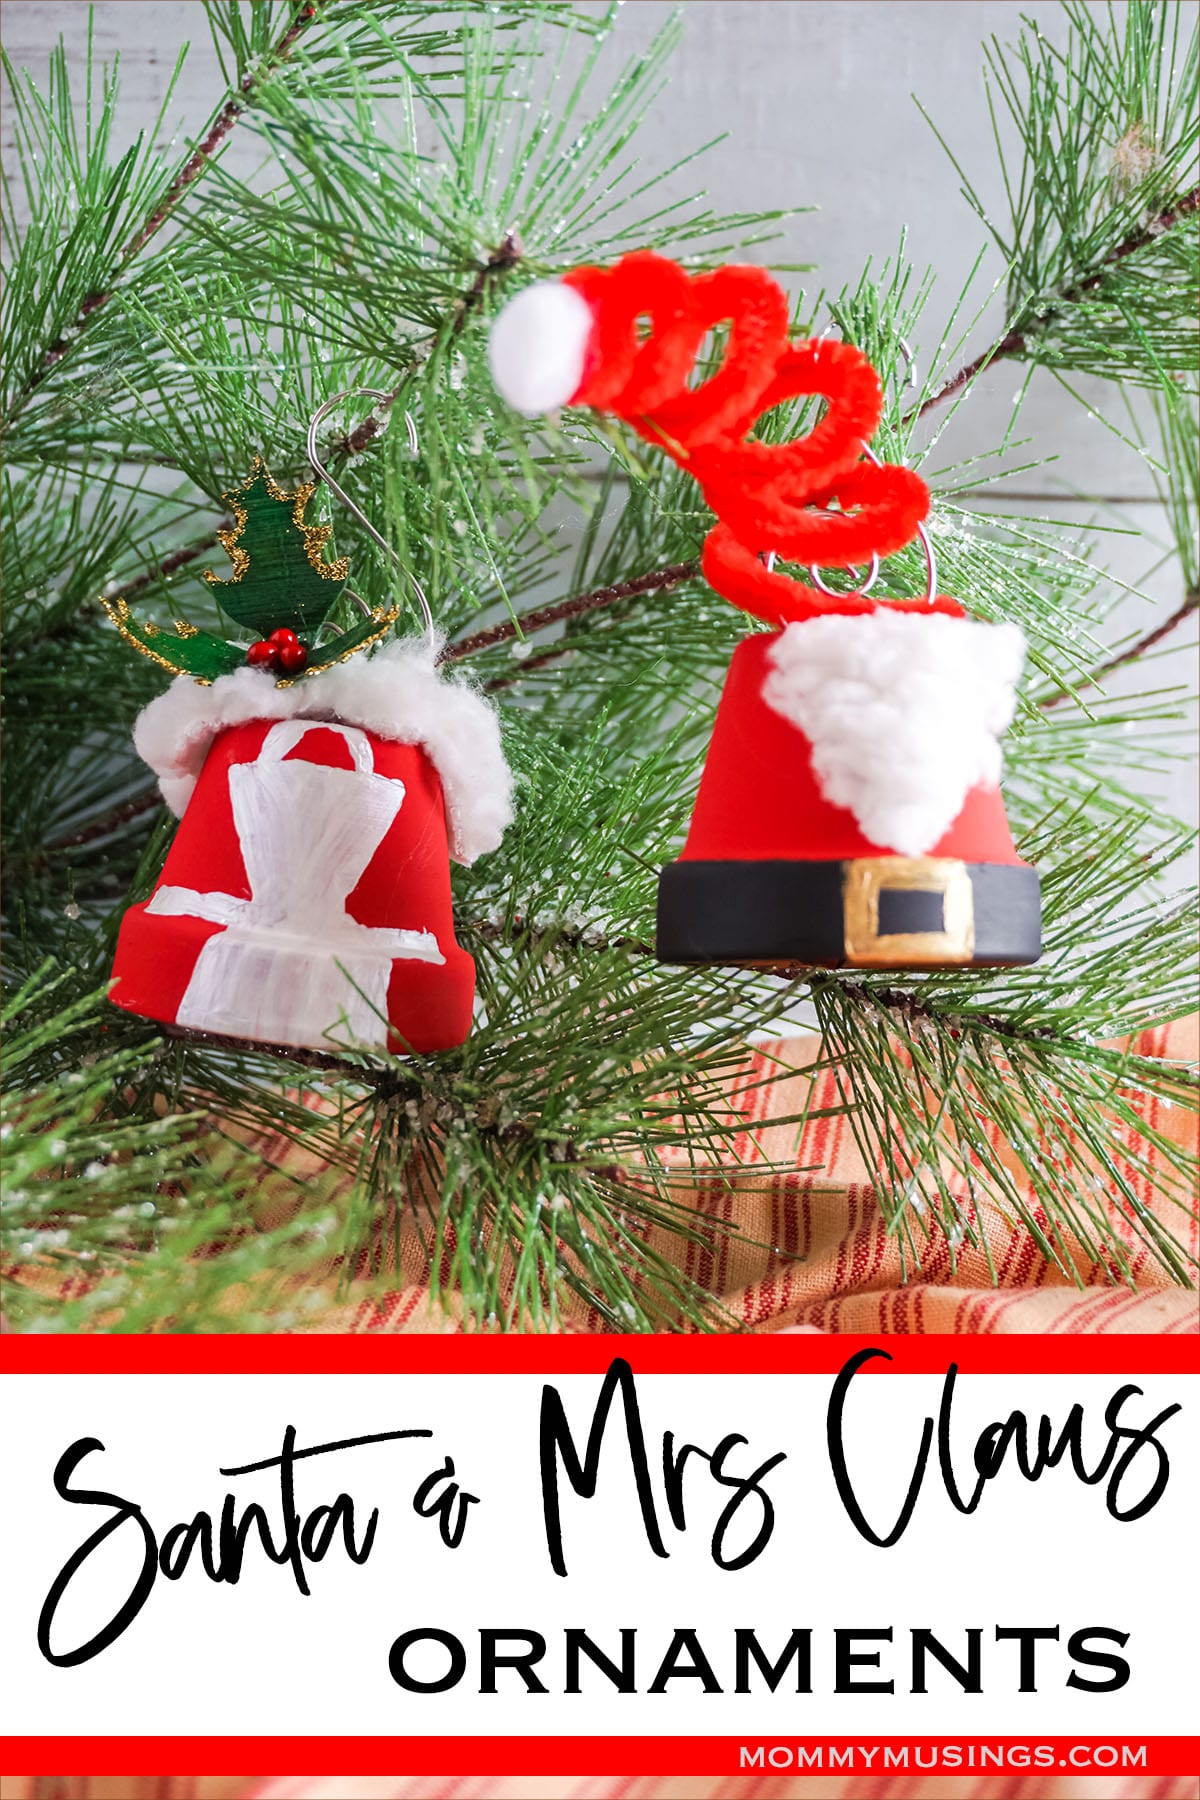 diy terra cotta pot ornaments with text which reads santa and mrs claus ornaments 